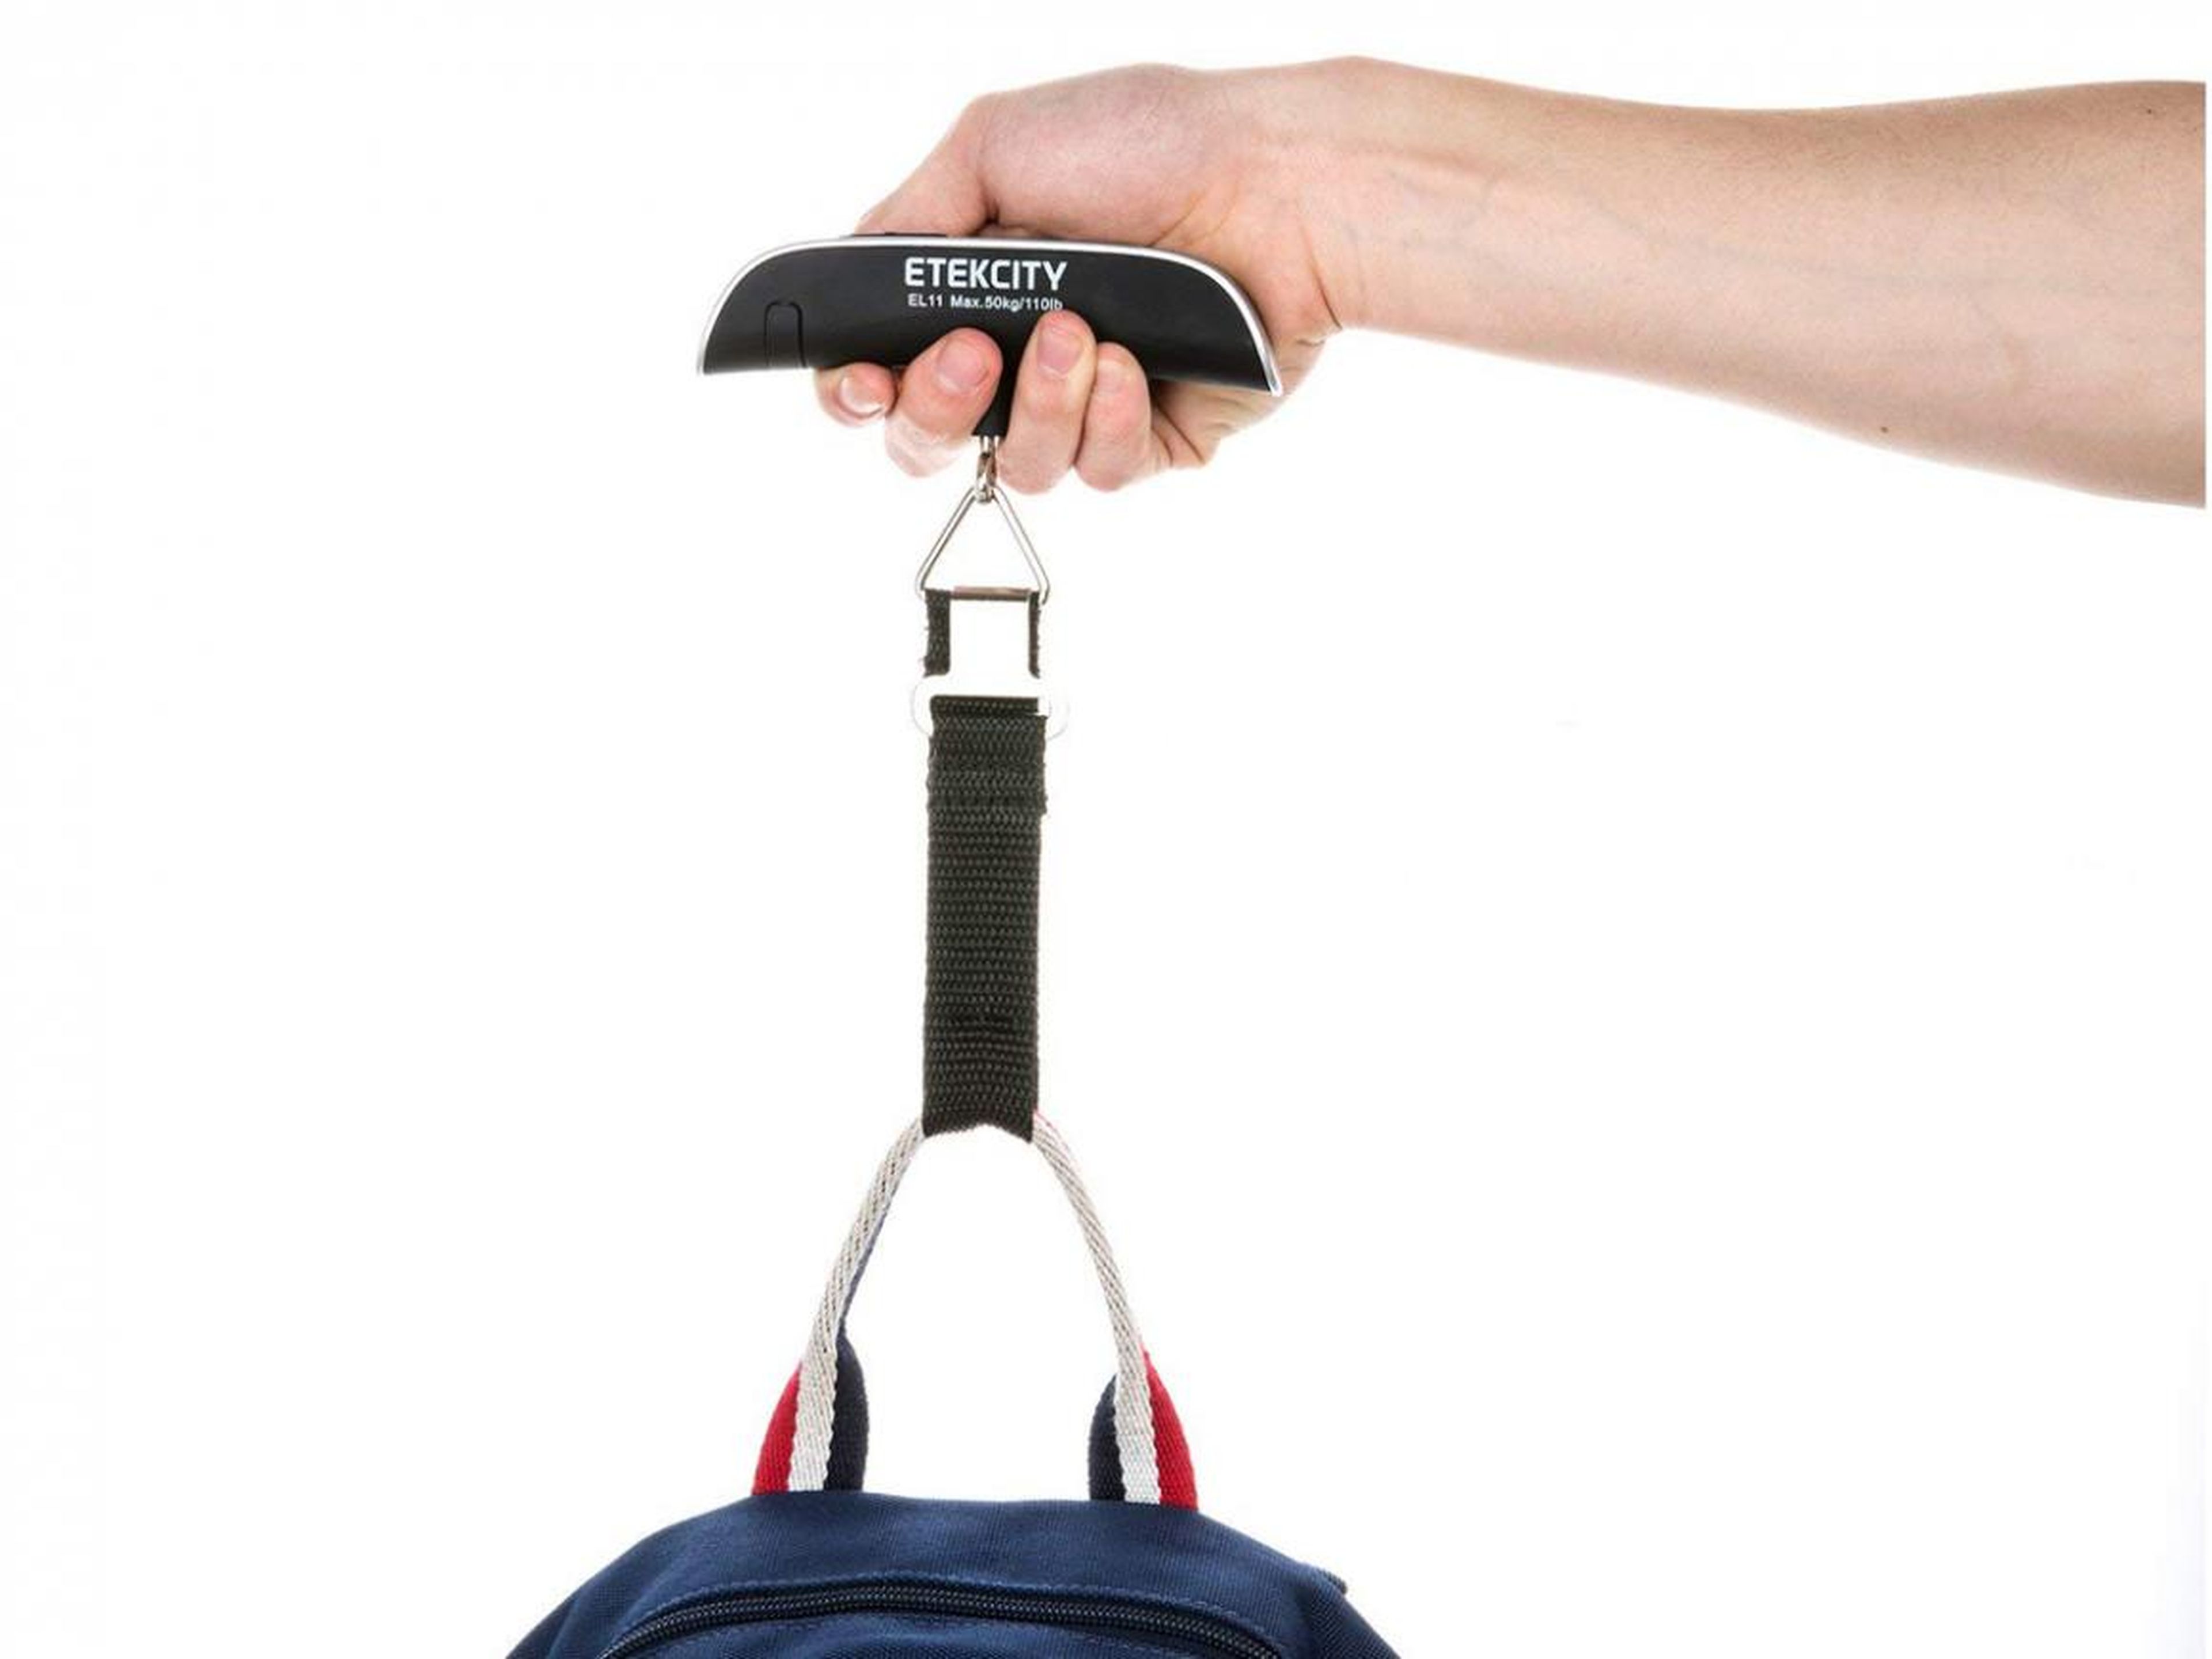 Every traveler should get this $11 luggage scale before their next international flight